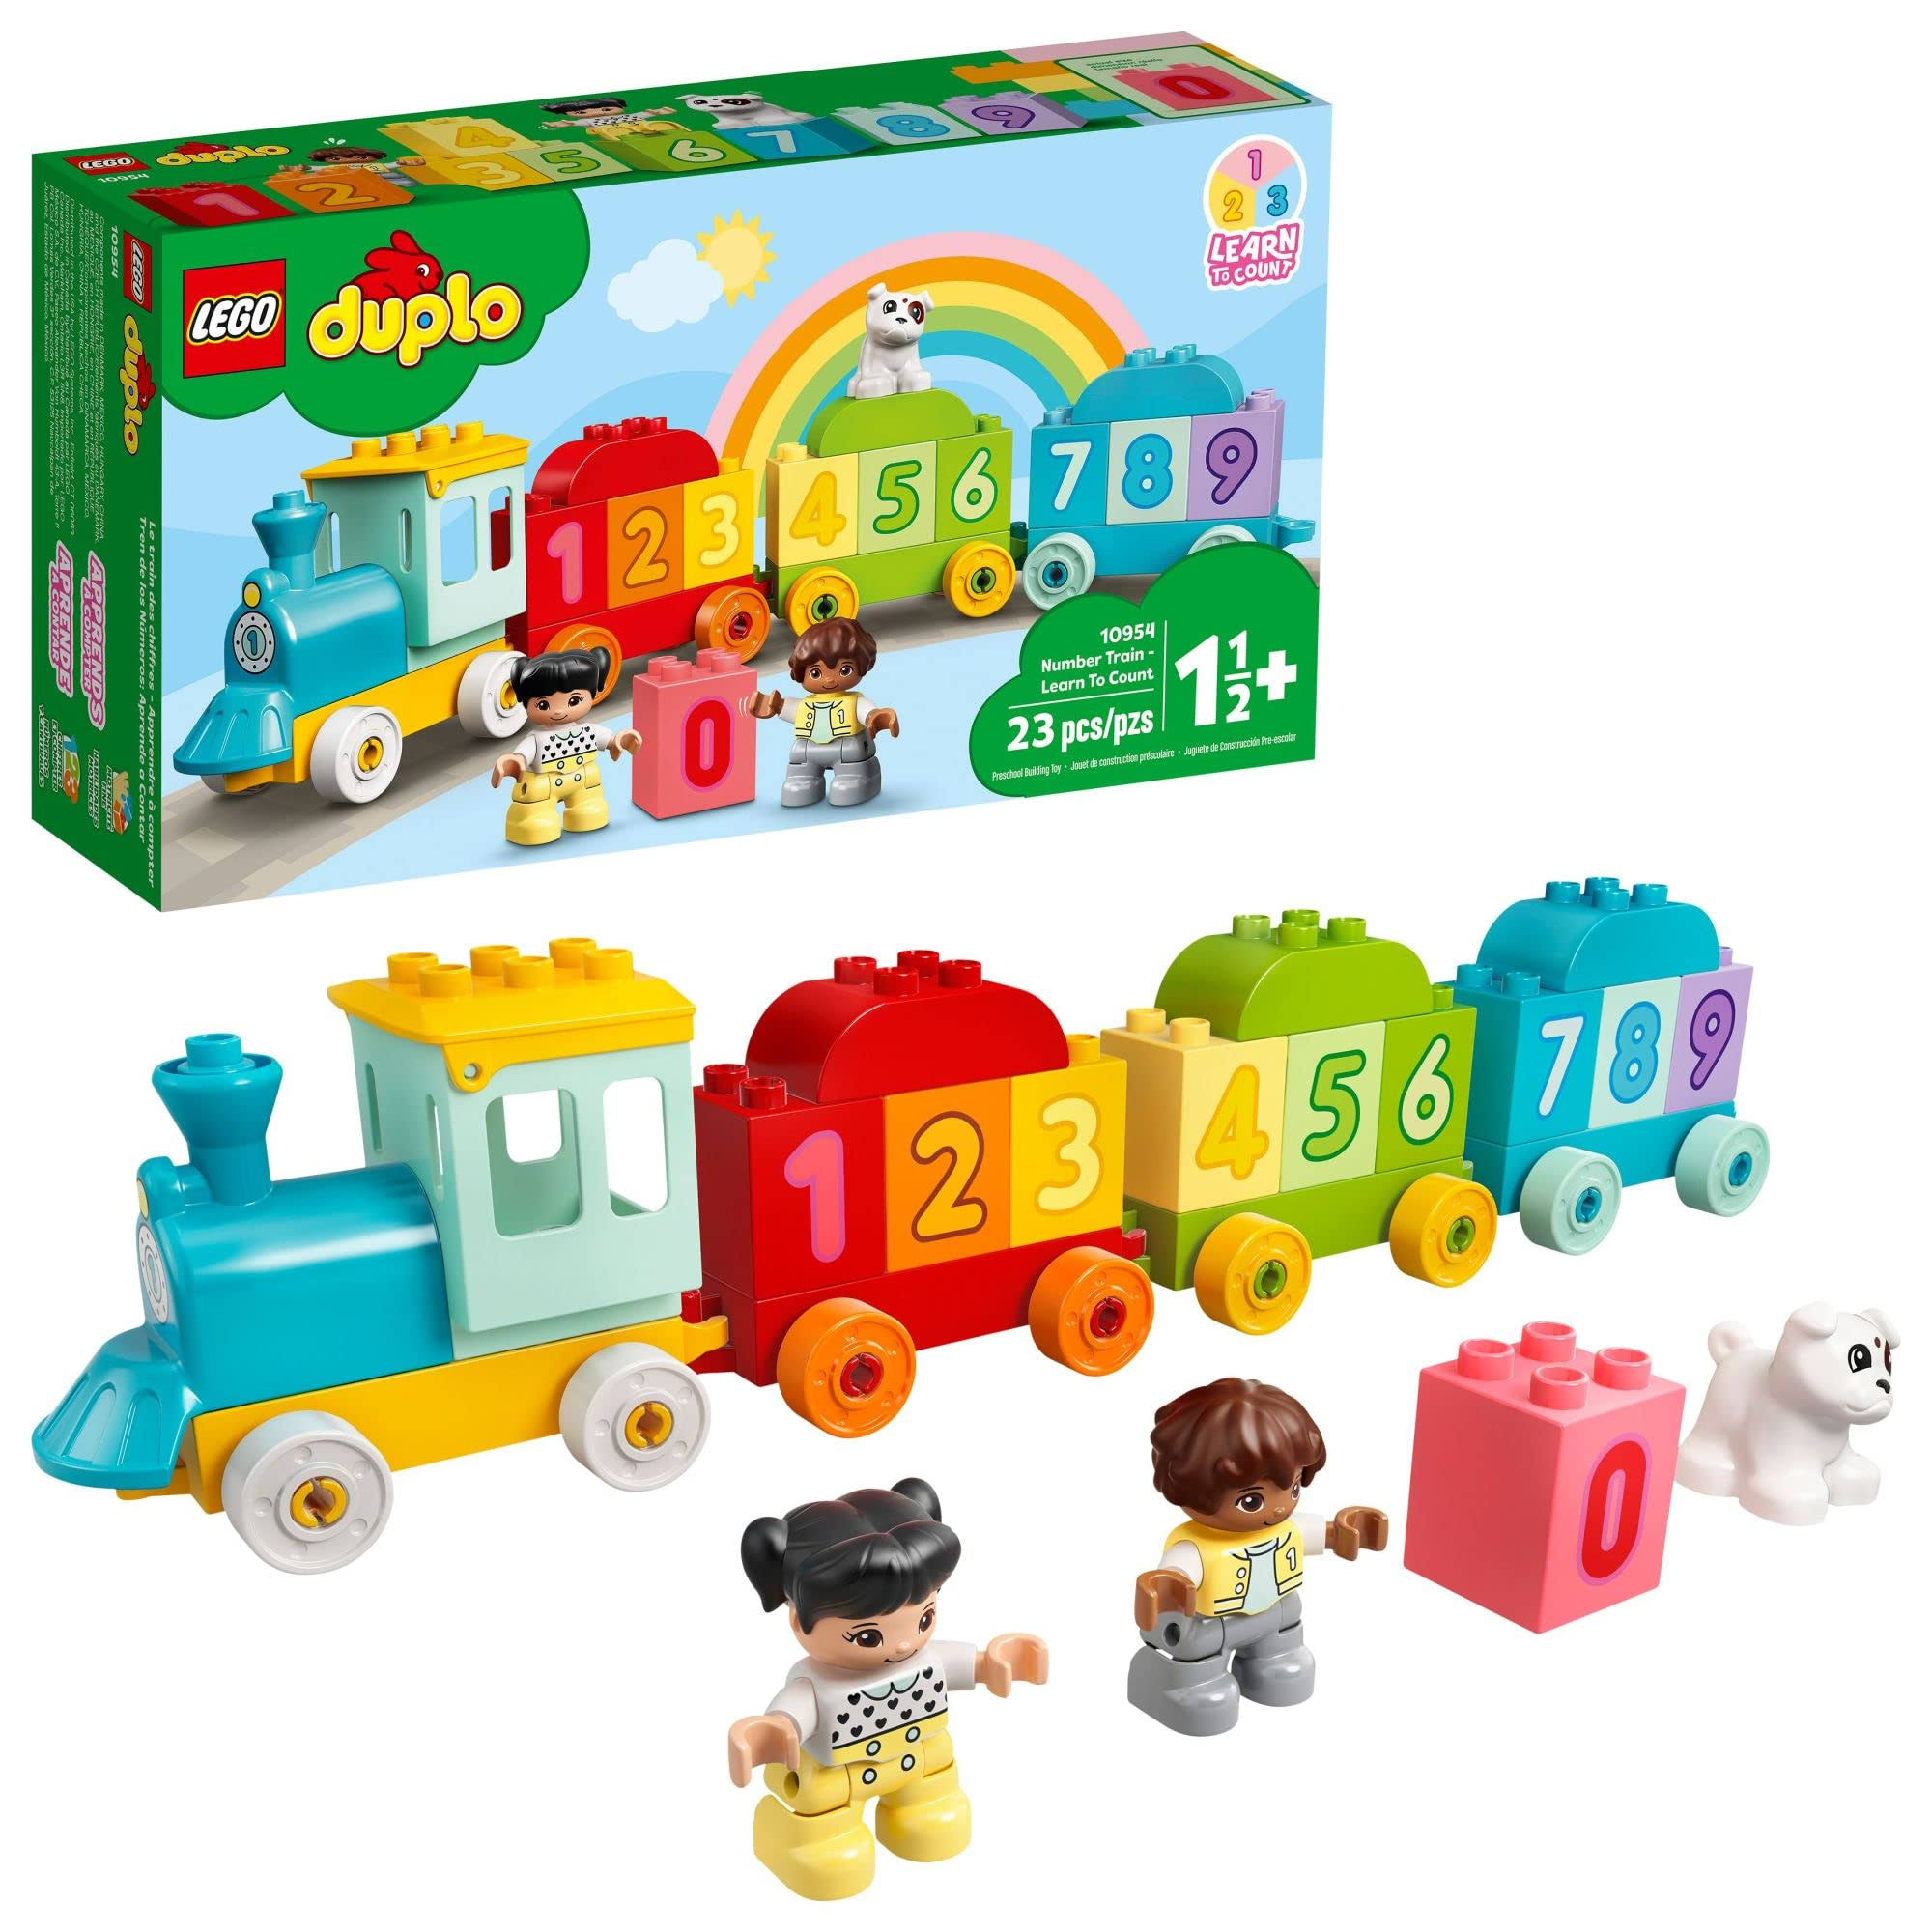 LEGO DUPLO My First Number Train - Learn to Count 10954 Building Multicolor